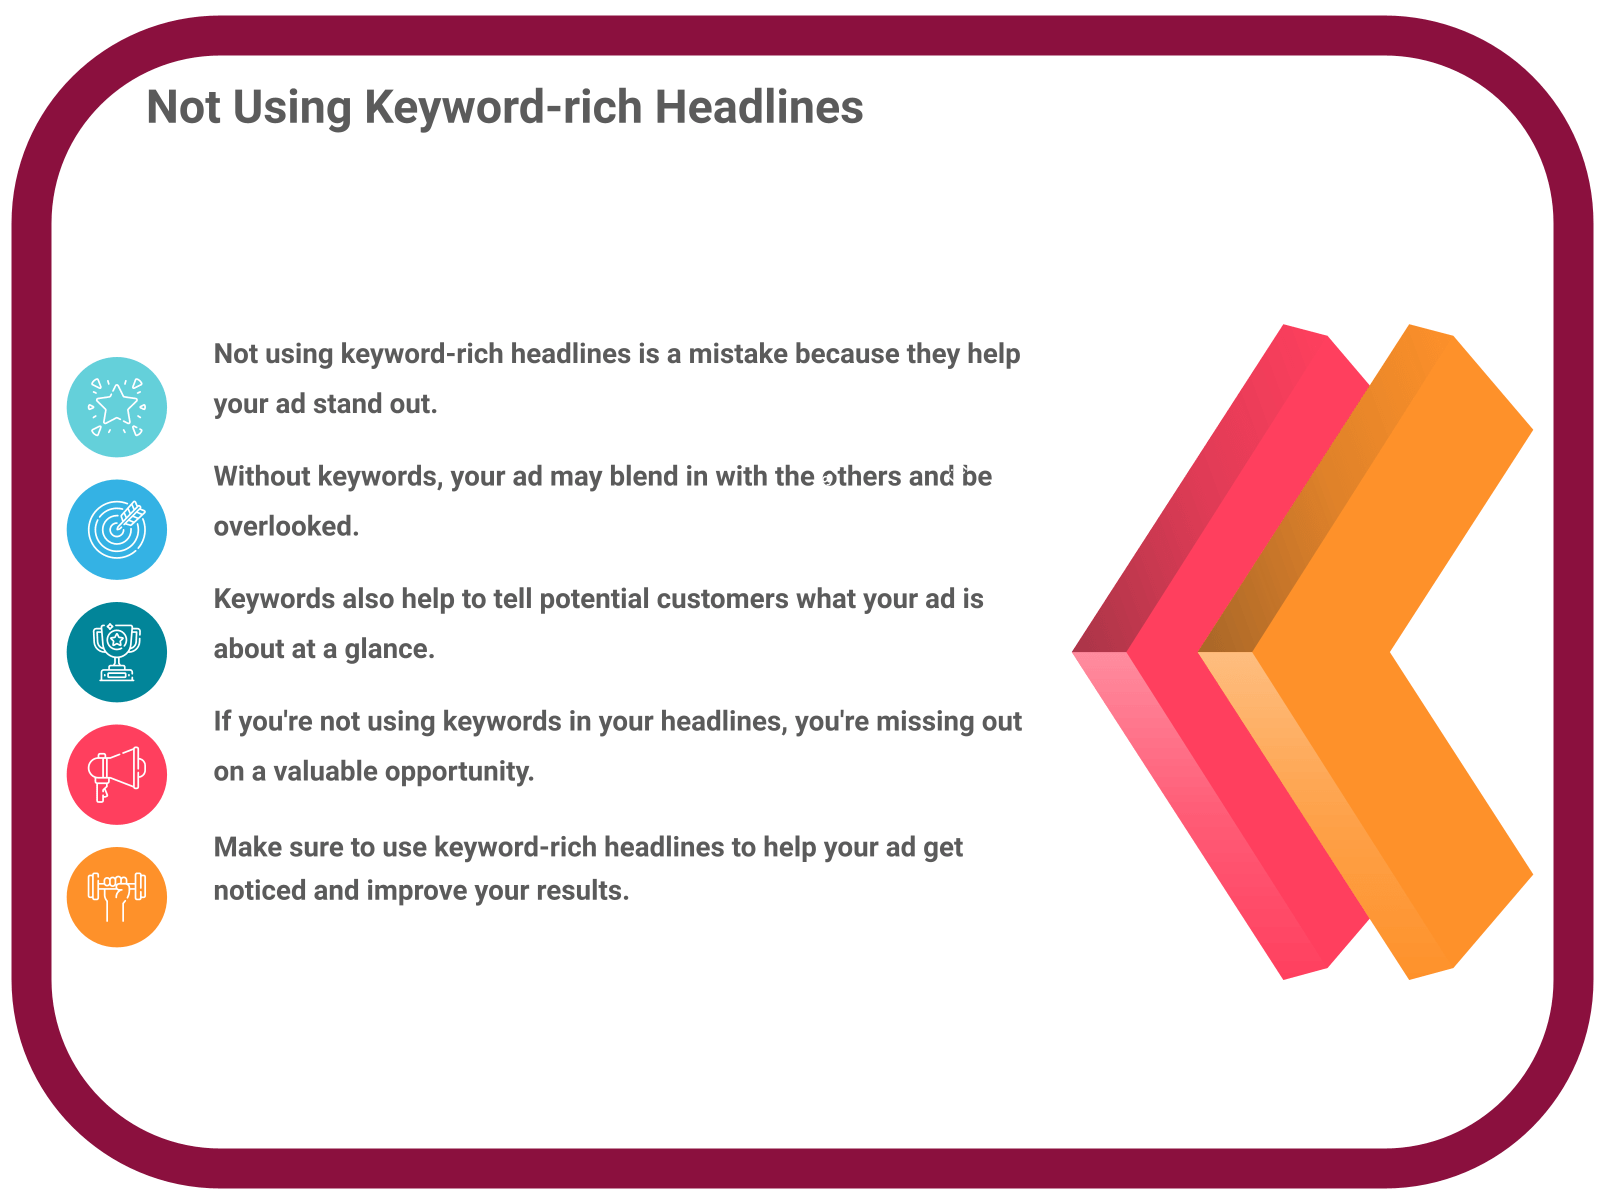 INFOGRAPHIC: Not using keyword-rich headlines - Poll the People